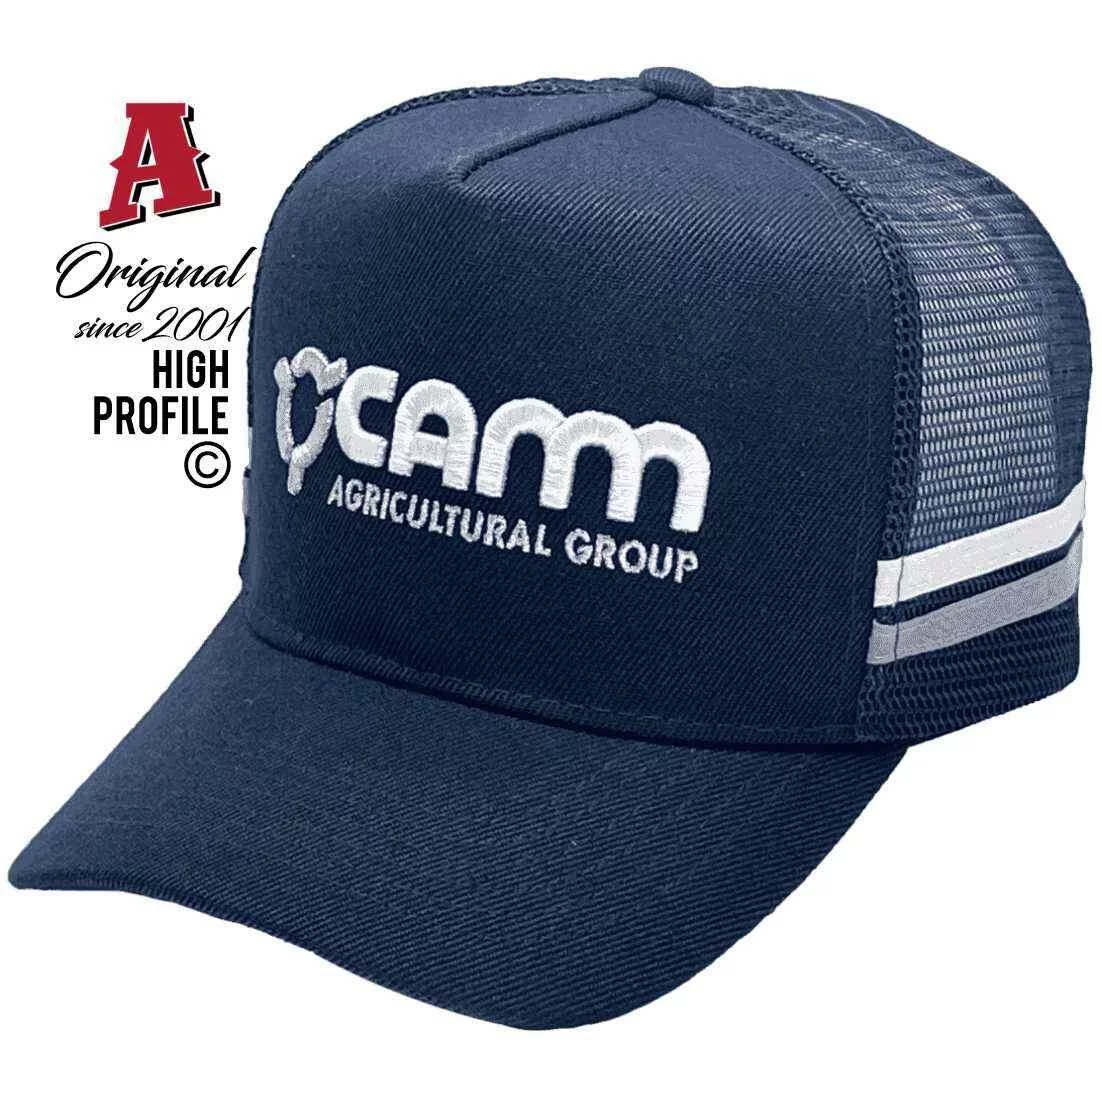 Camm Agricultural Group Bowenville QLD Basic Aussie Trucker Hats with Australian HeadFit Crown & 2 SideBands Navy Snapback